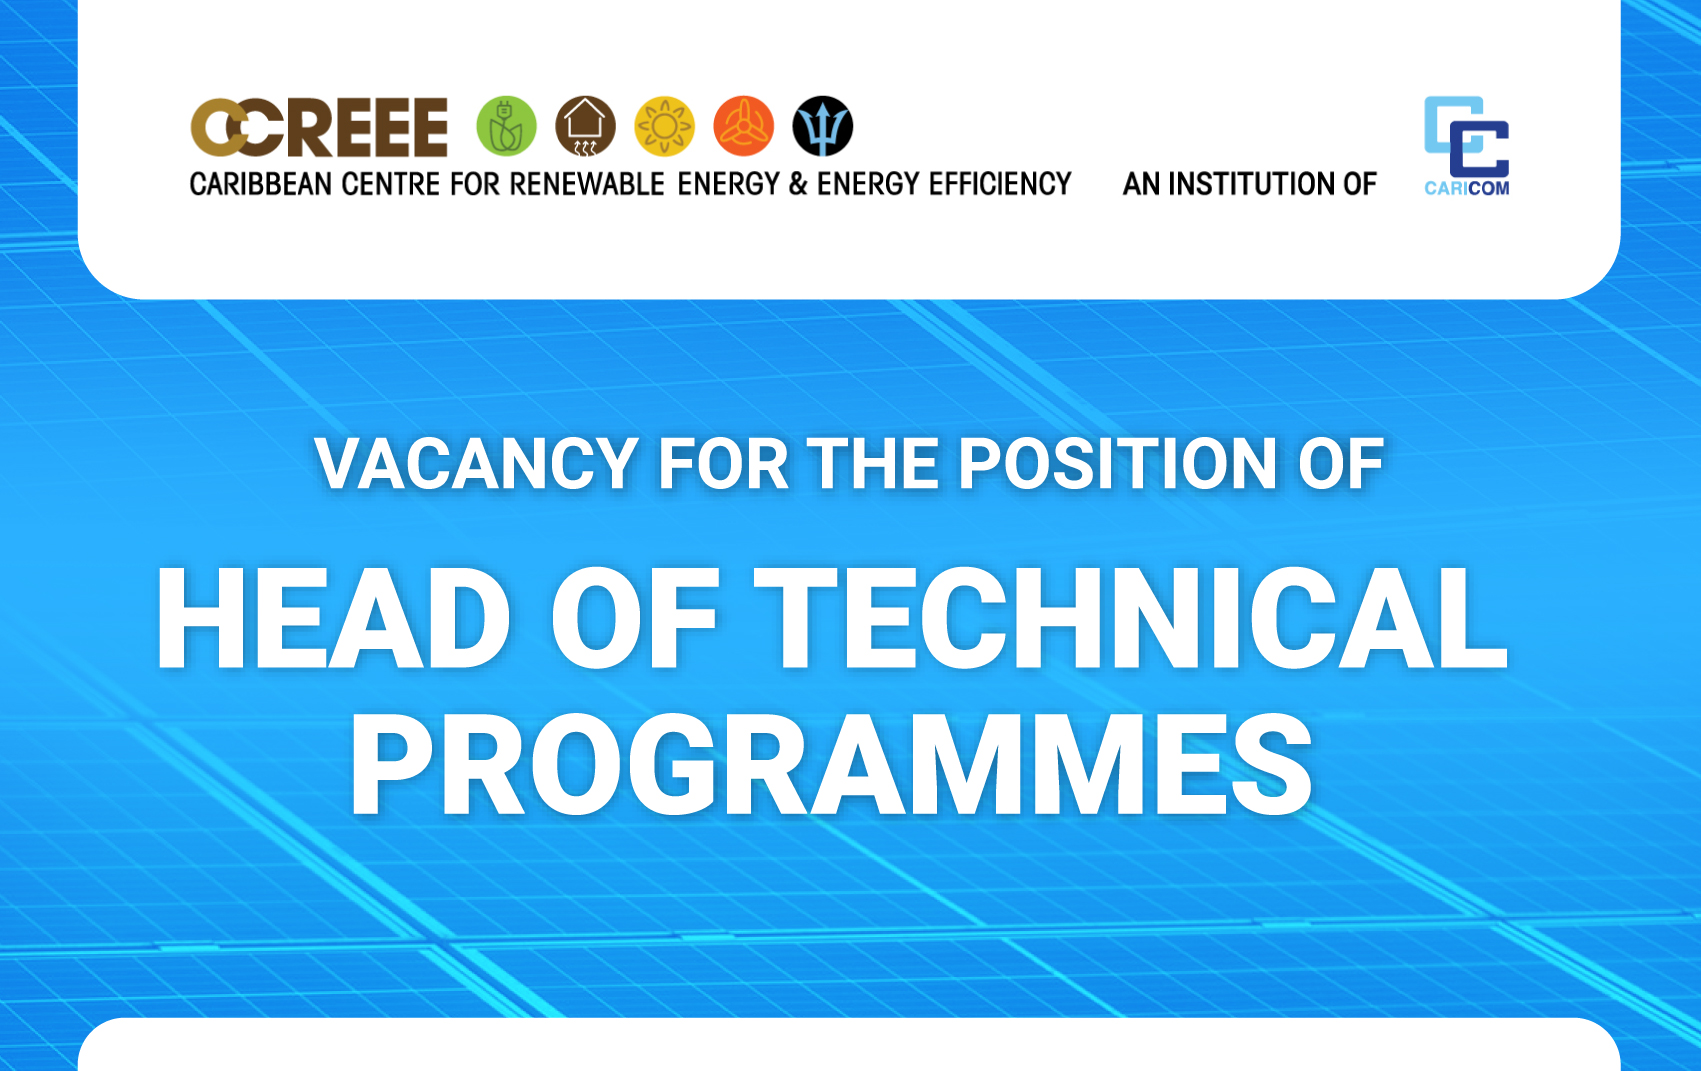 Vacancy for the Position of Head of Technical Programmes